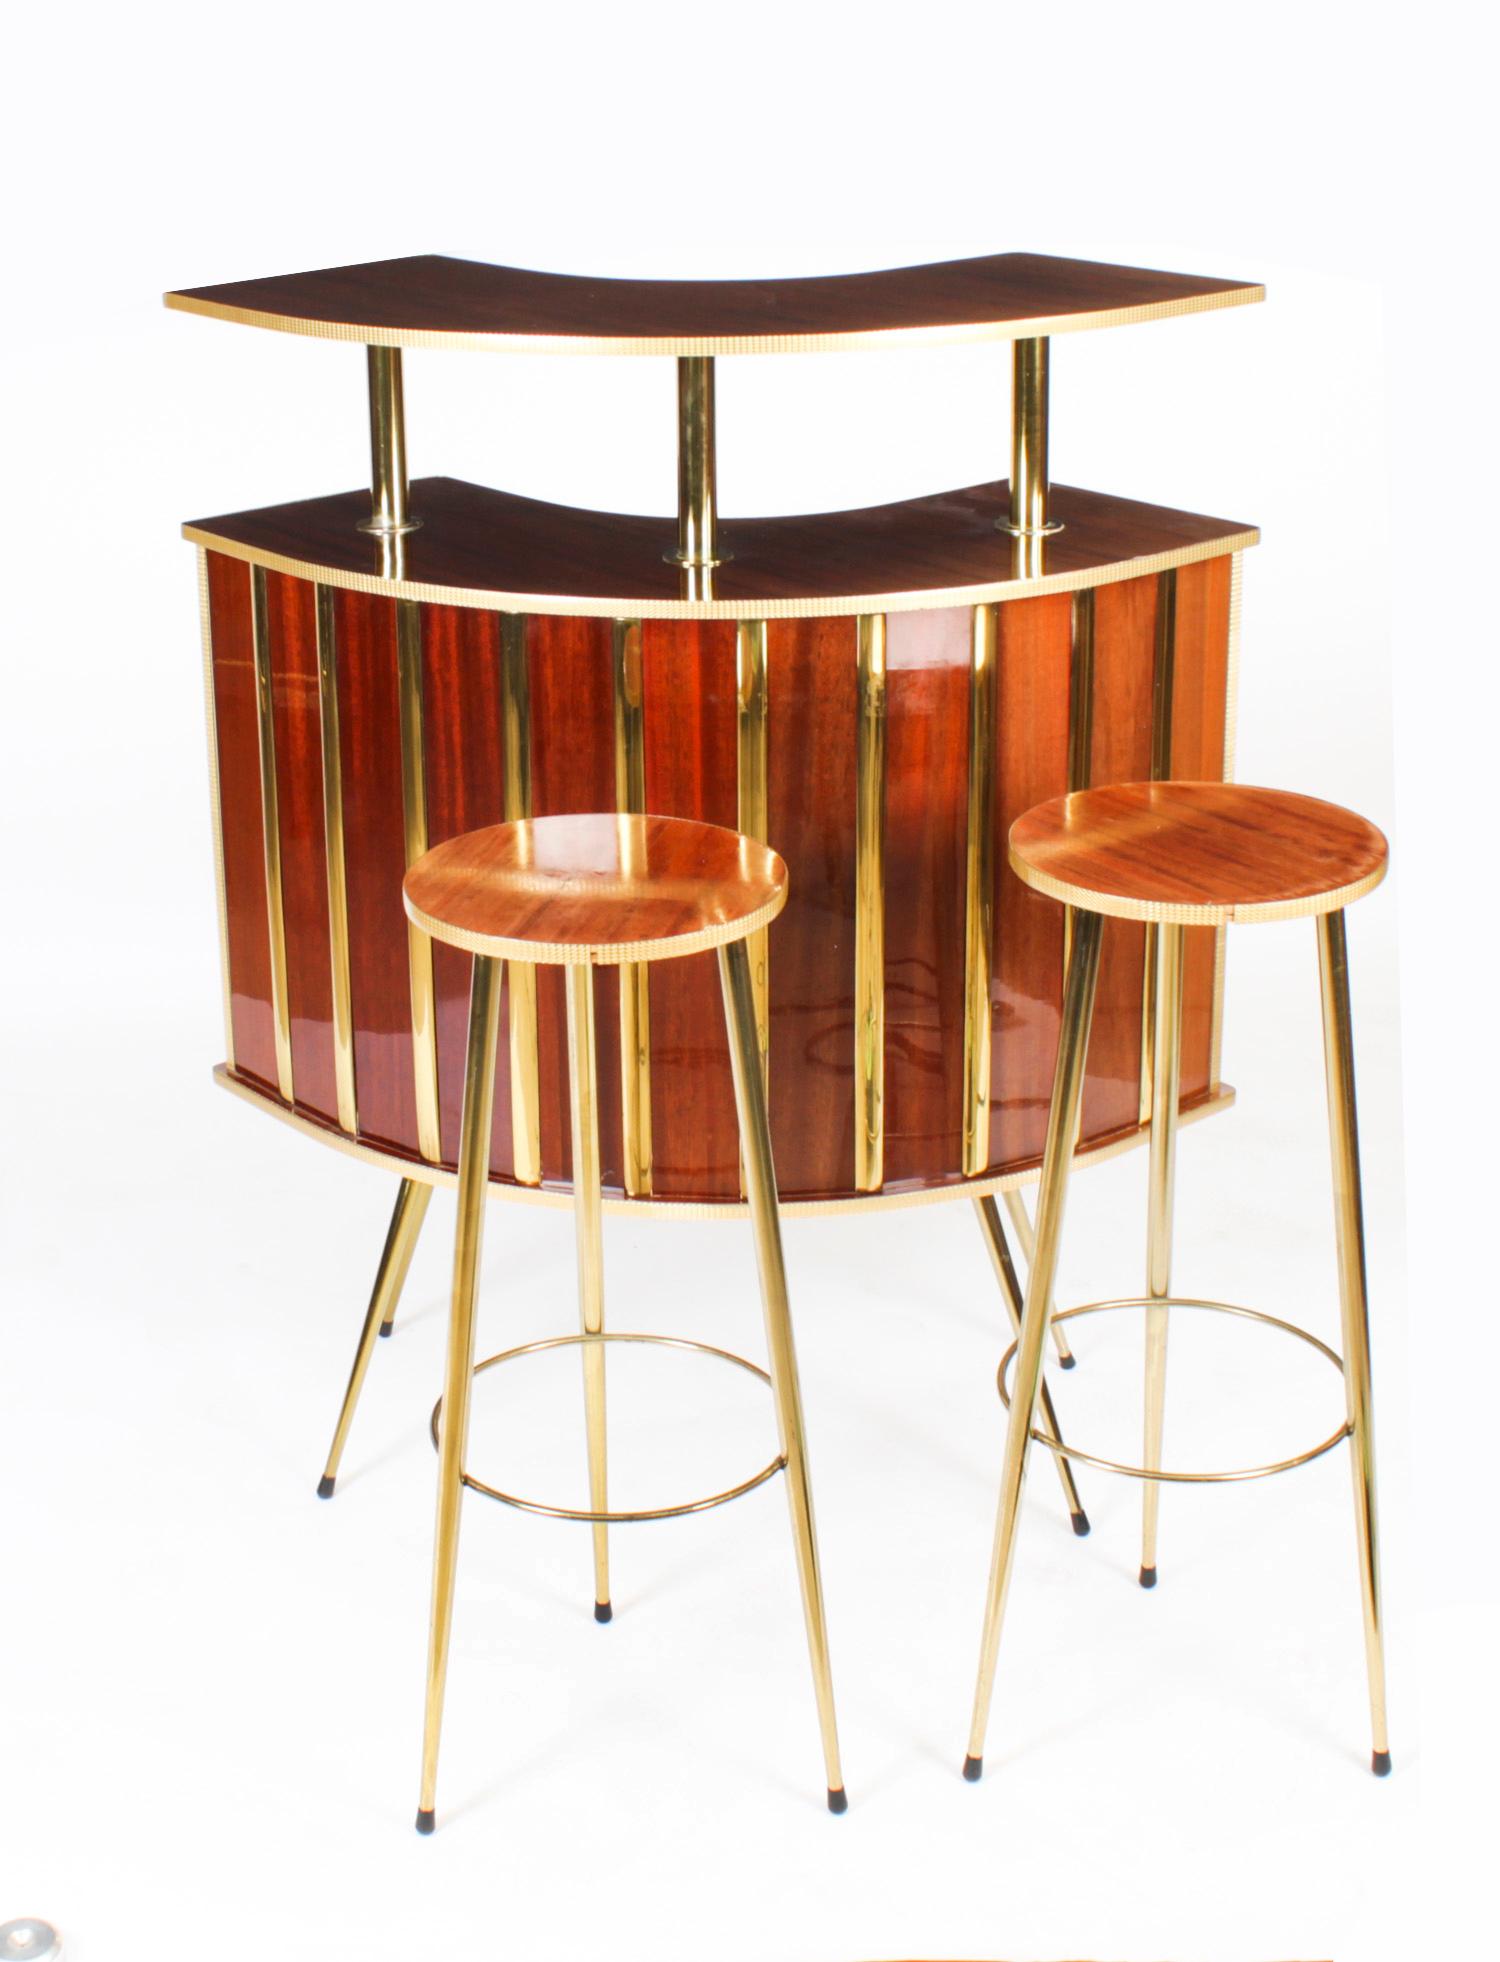 This is a large fantastic Italian Mid-Century Modern mahogany and ormolu mounted mini-bar with two stools, circa 1940's in date.

The botanical name for the mahogany on this bar and stools is made of Swietenia Macrophylla and this type of mahogany